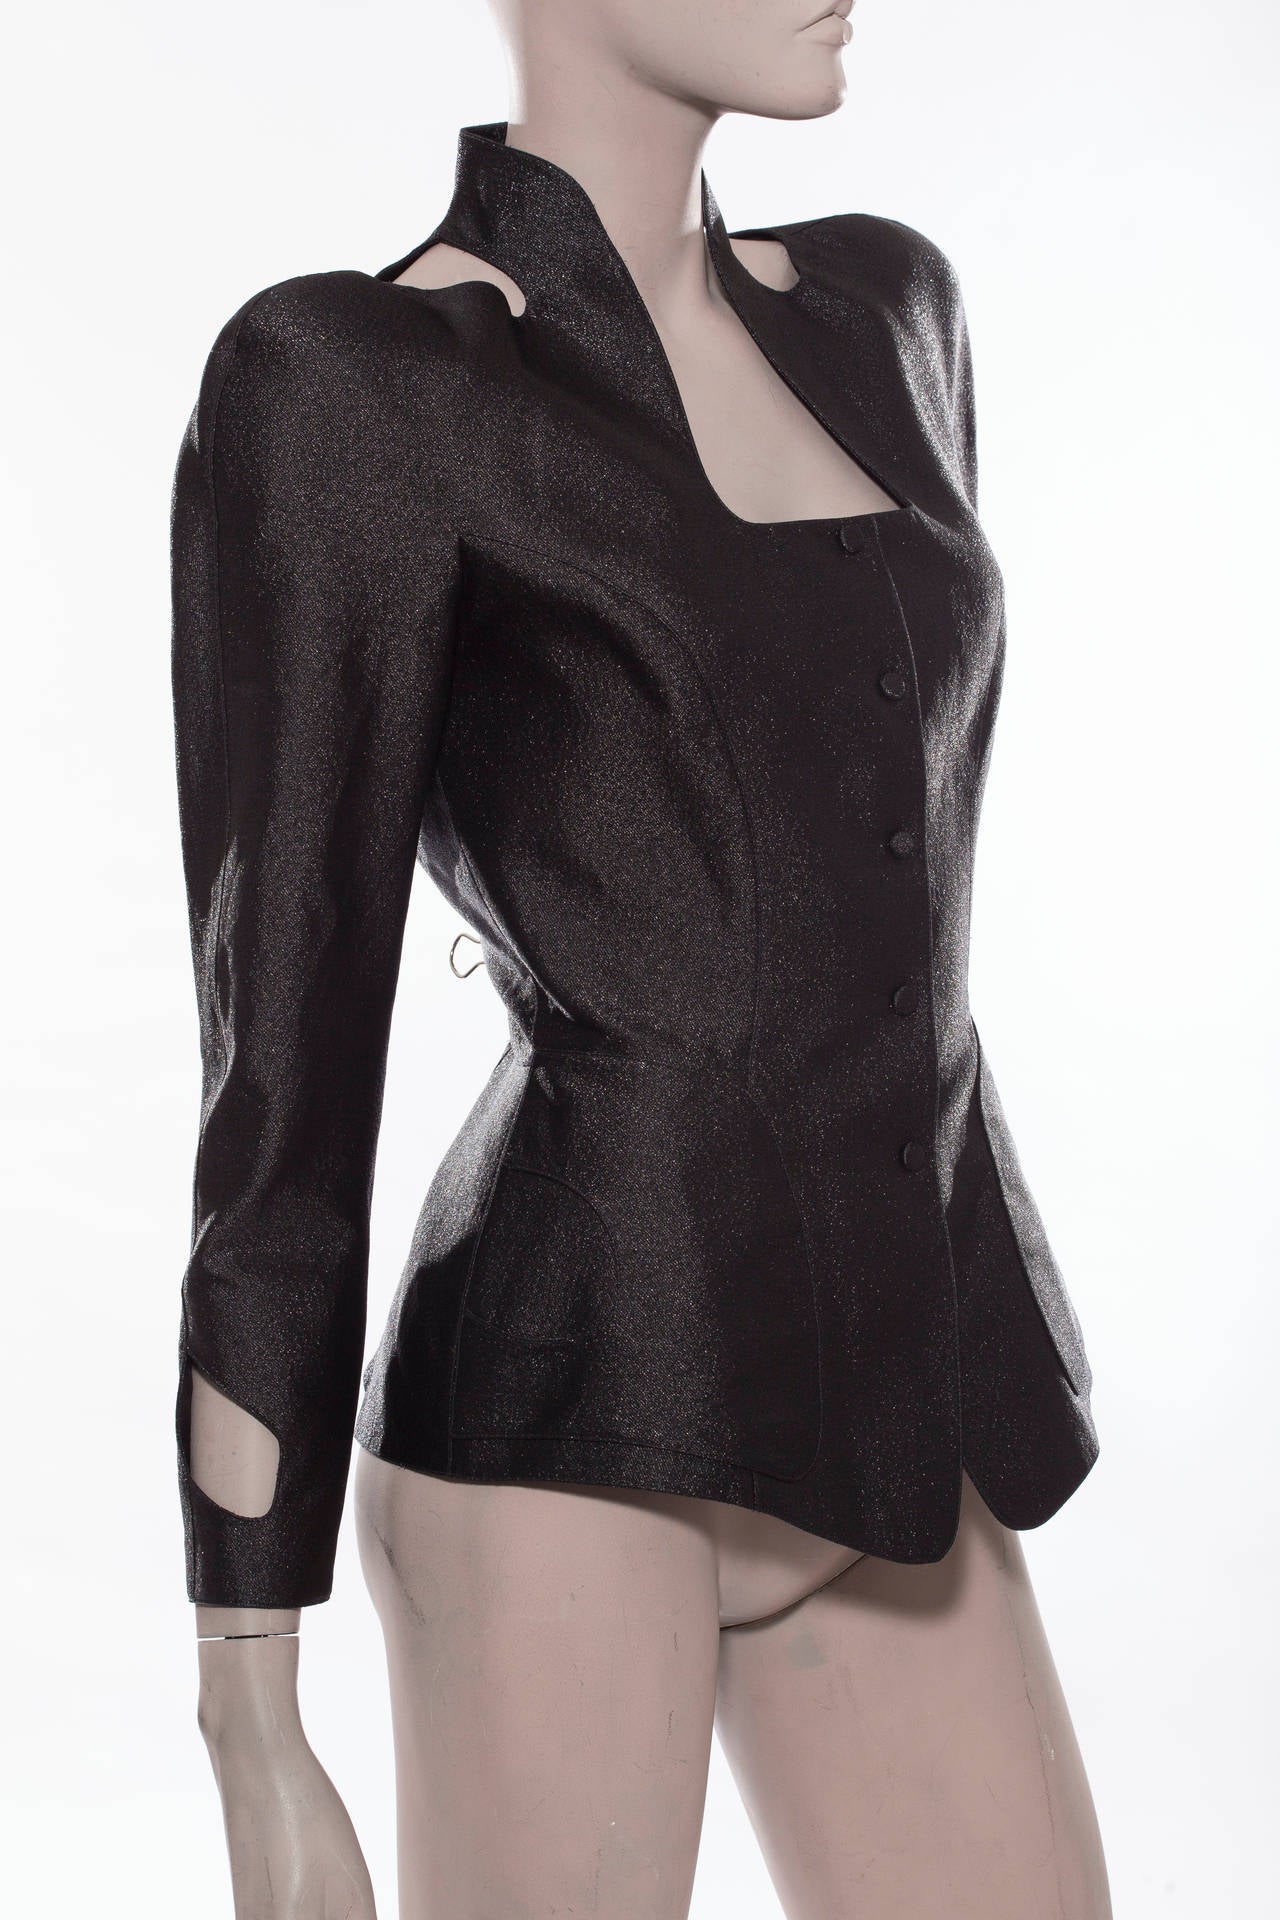 Thierry Mugler, circa 1980's, black snap front jacket with cut-out sleeve and shoulder.